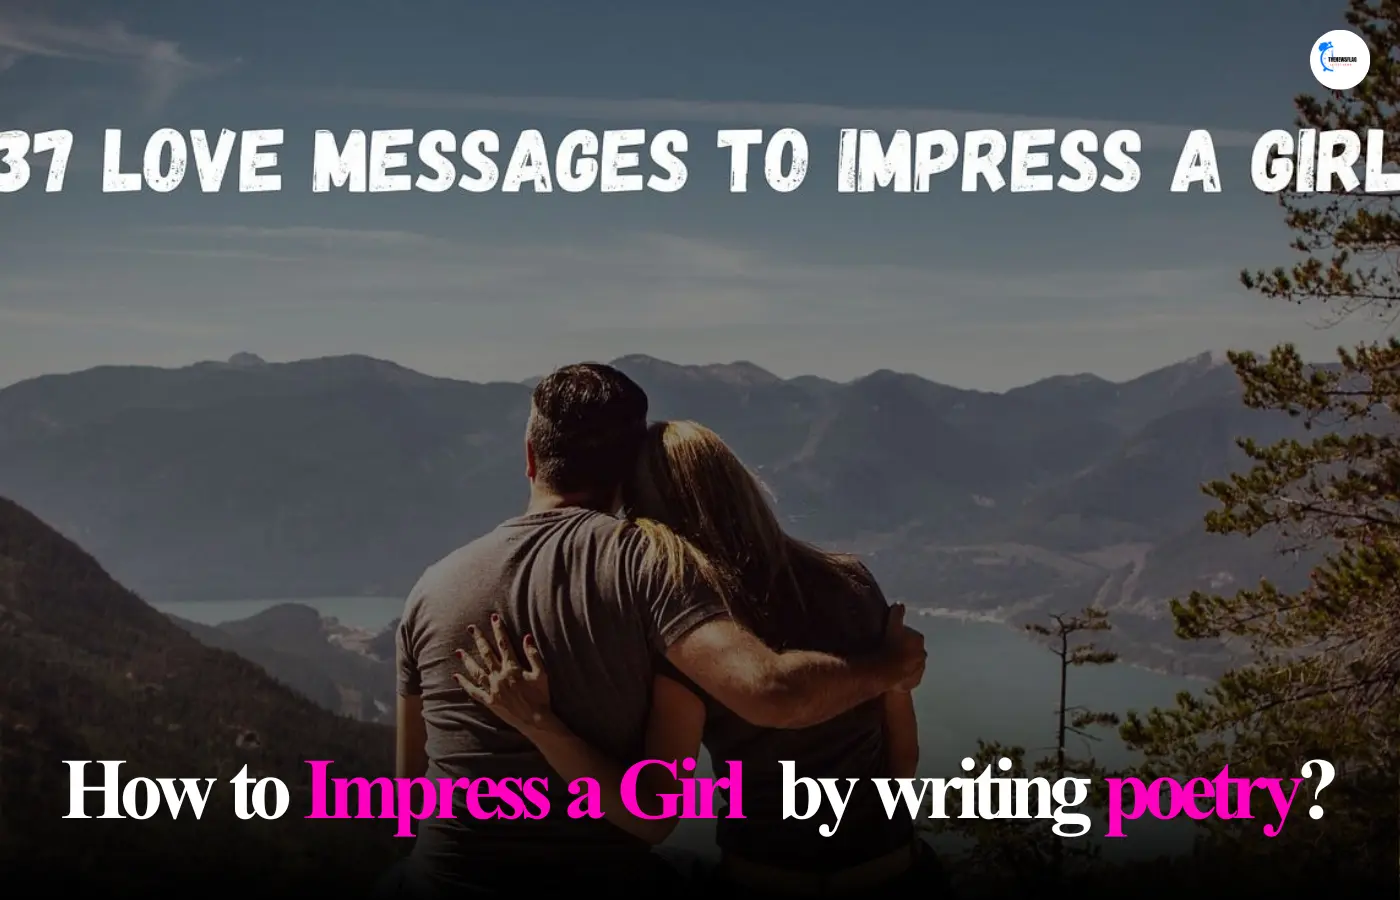 How can I impress a Girl by writing poems?